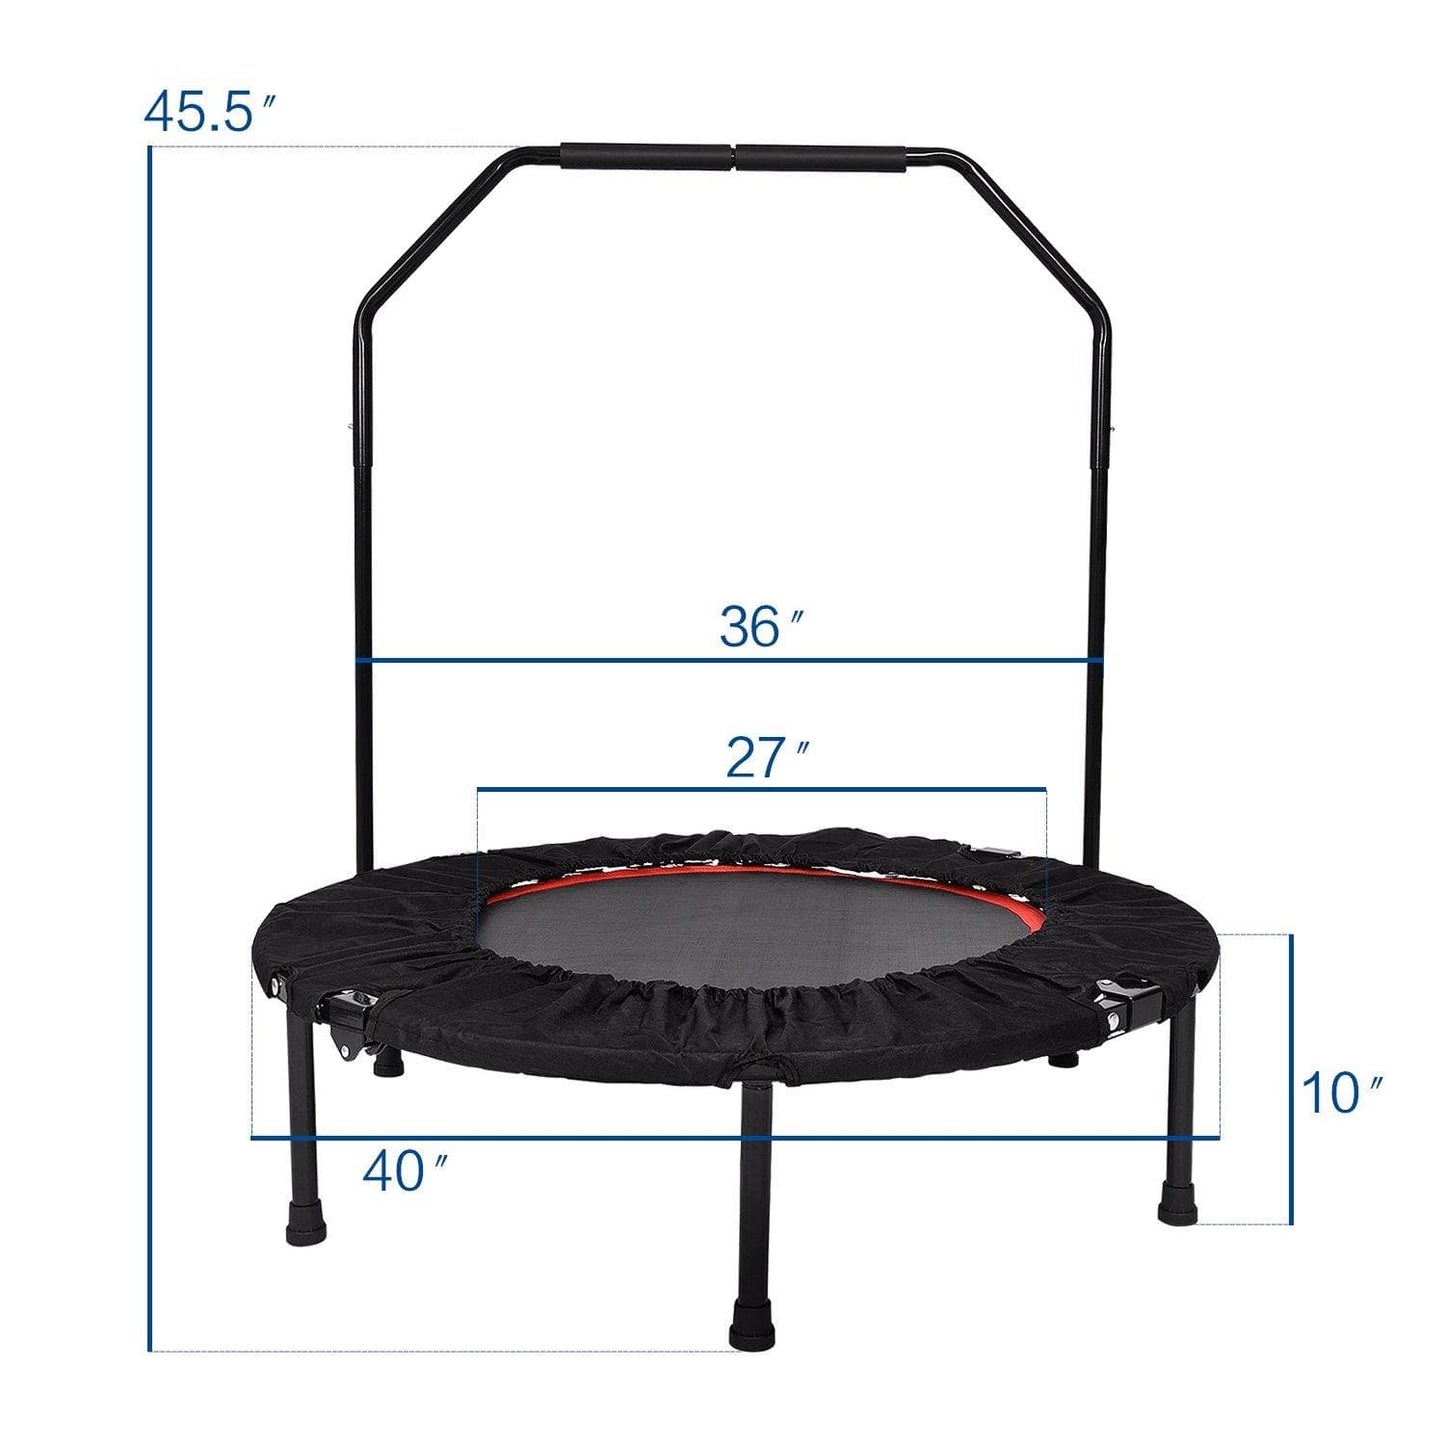 40" Mini Trampoline Rebounder, Portable & Foldable Exercise Trampoline With Handrail For Adults Kids Body Fitness Training Workouts, Indoor/Garden/Workout Cardio - Westfield Retailers